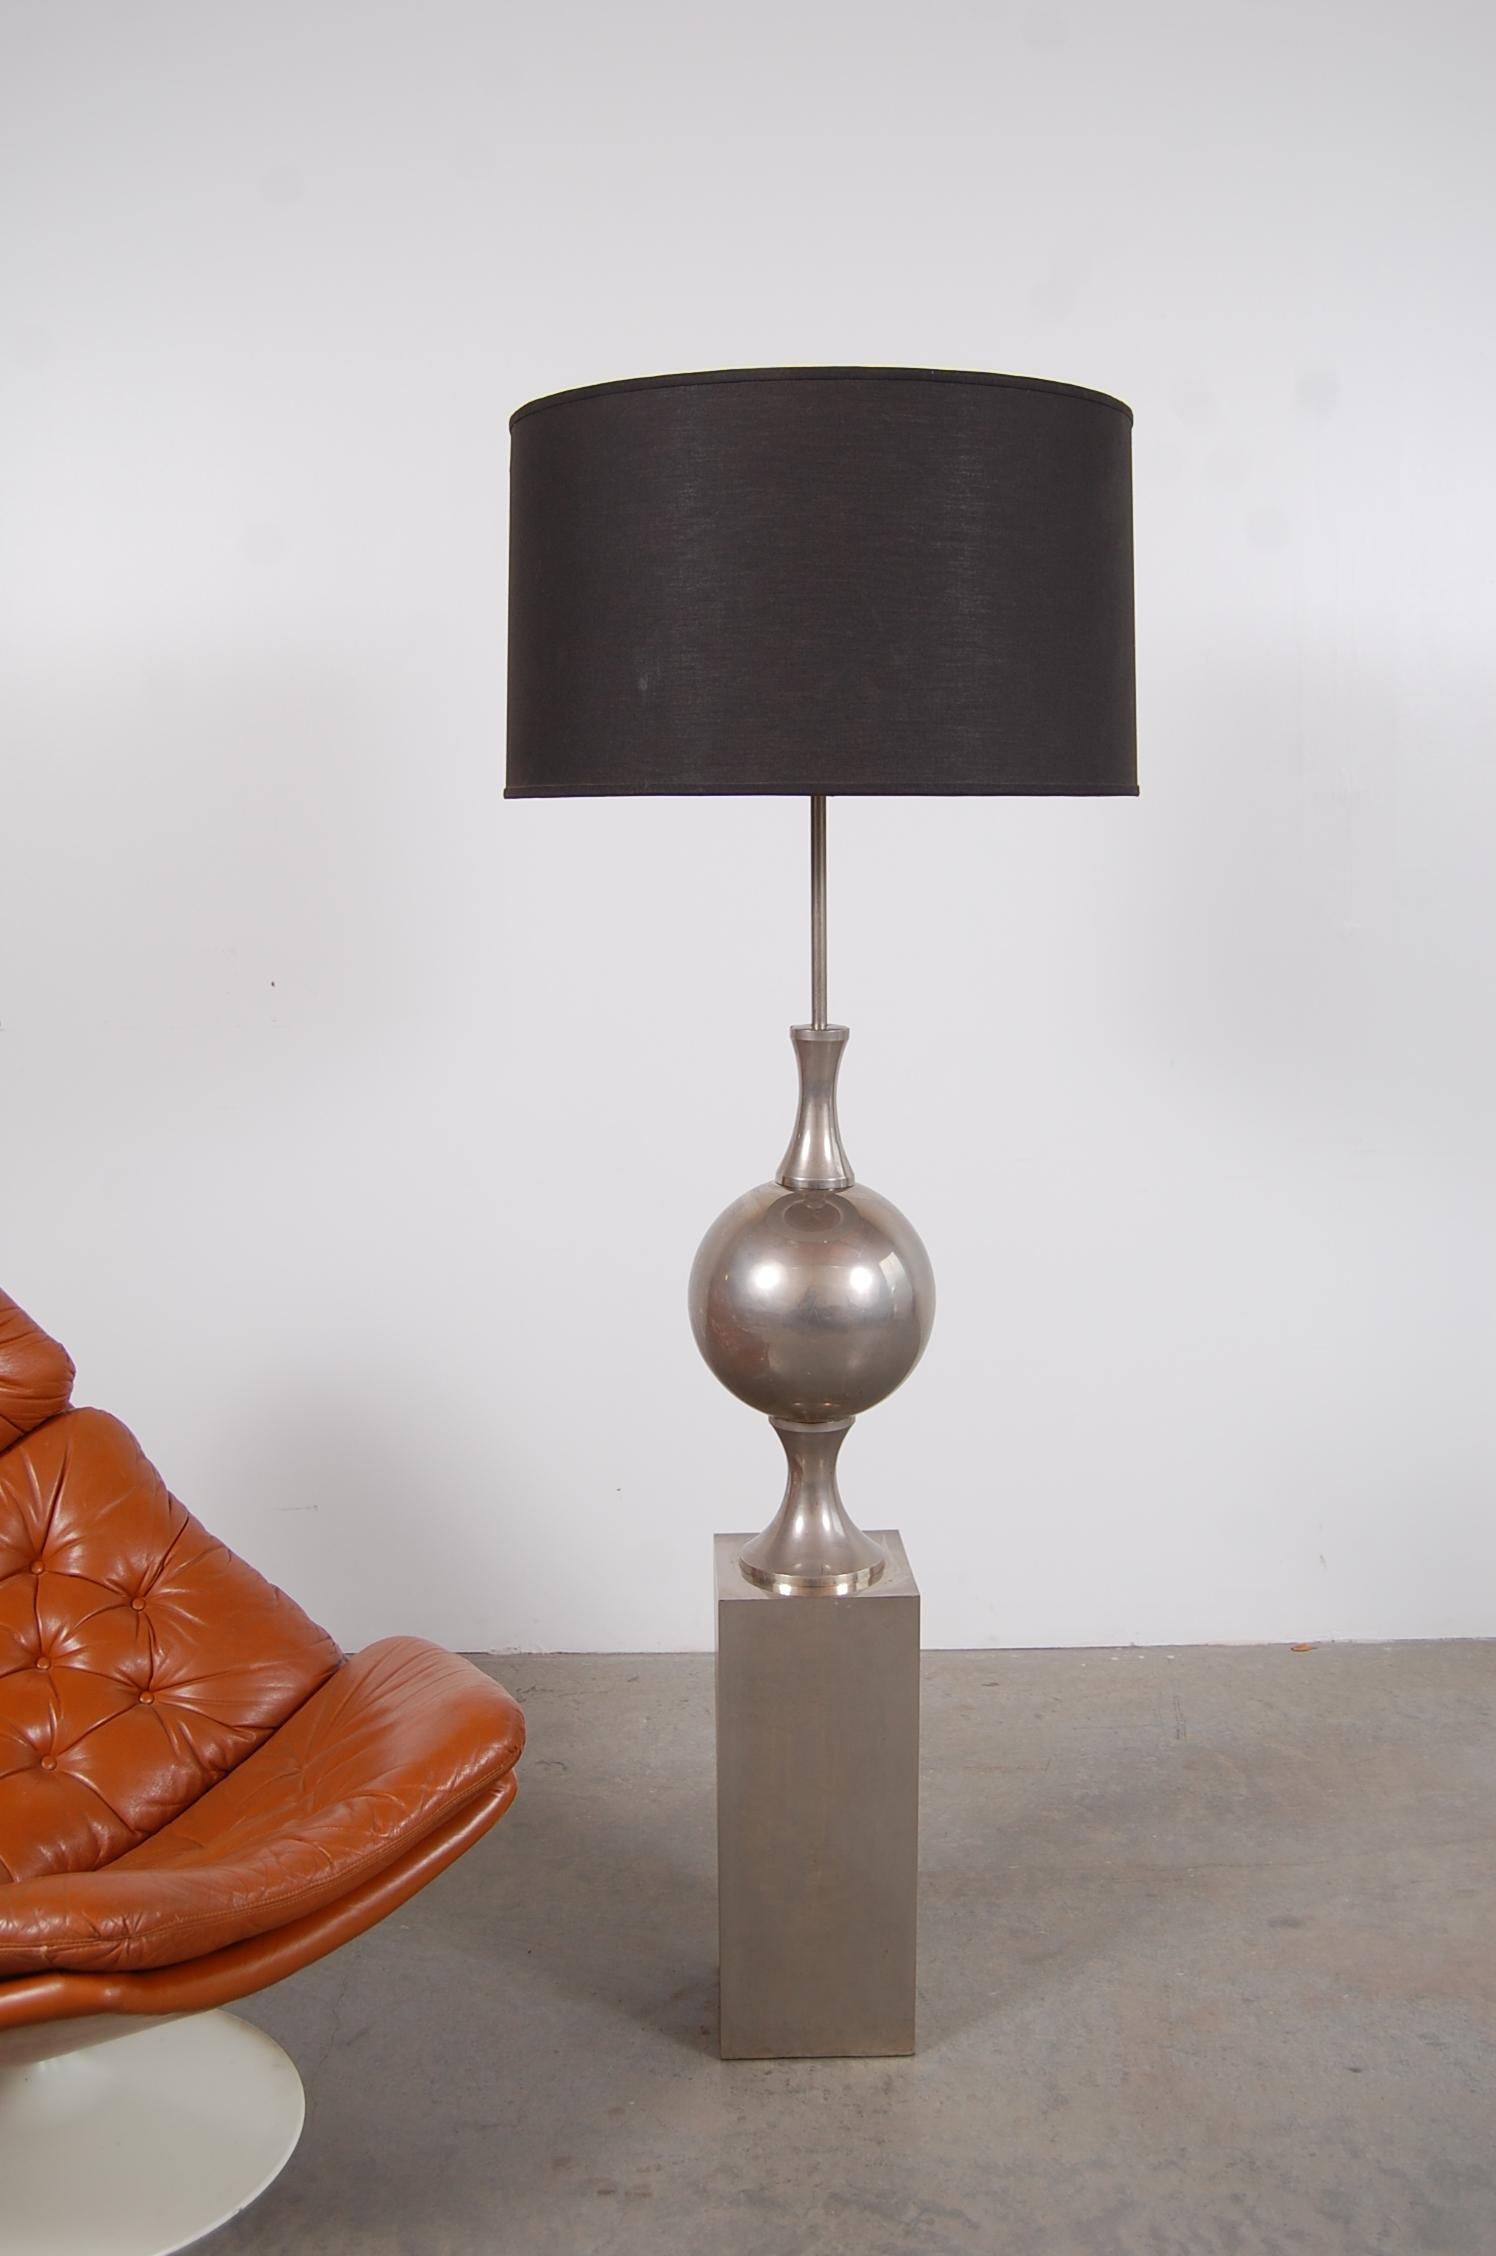 Floor lamp designed by Philippe Barbier, France, circa 1968. Lamp is constructed of nickel plated steel. Lamp has been completely re-wired for safety, and dressed up with black cloth covered twist cord.